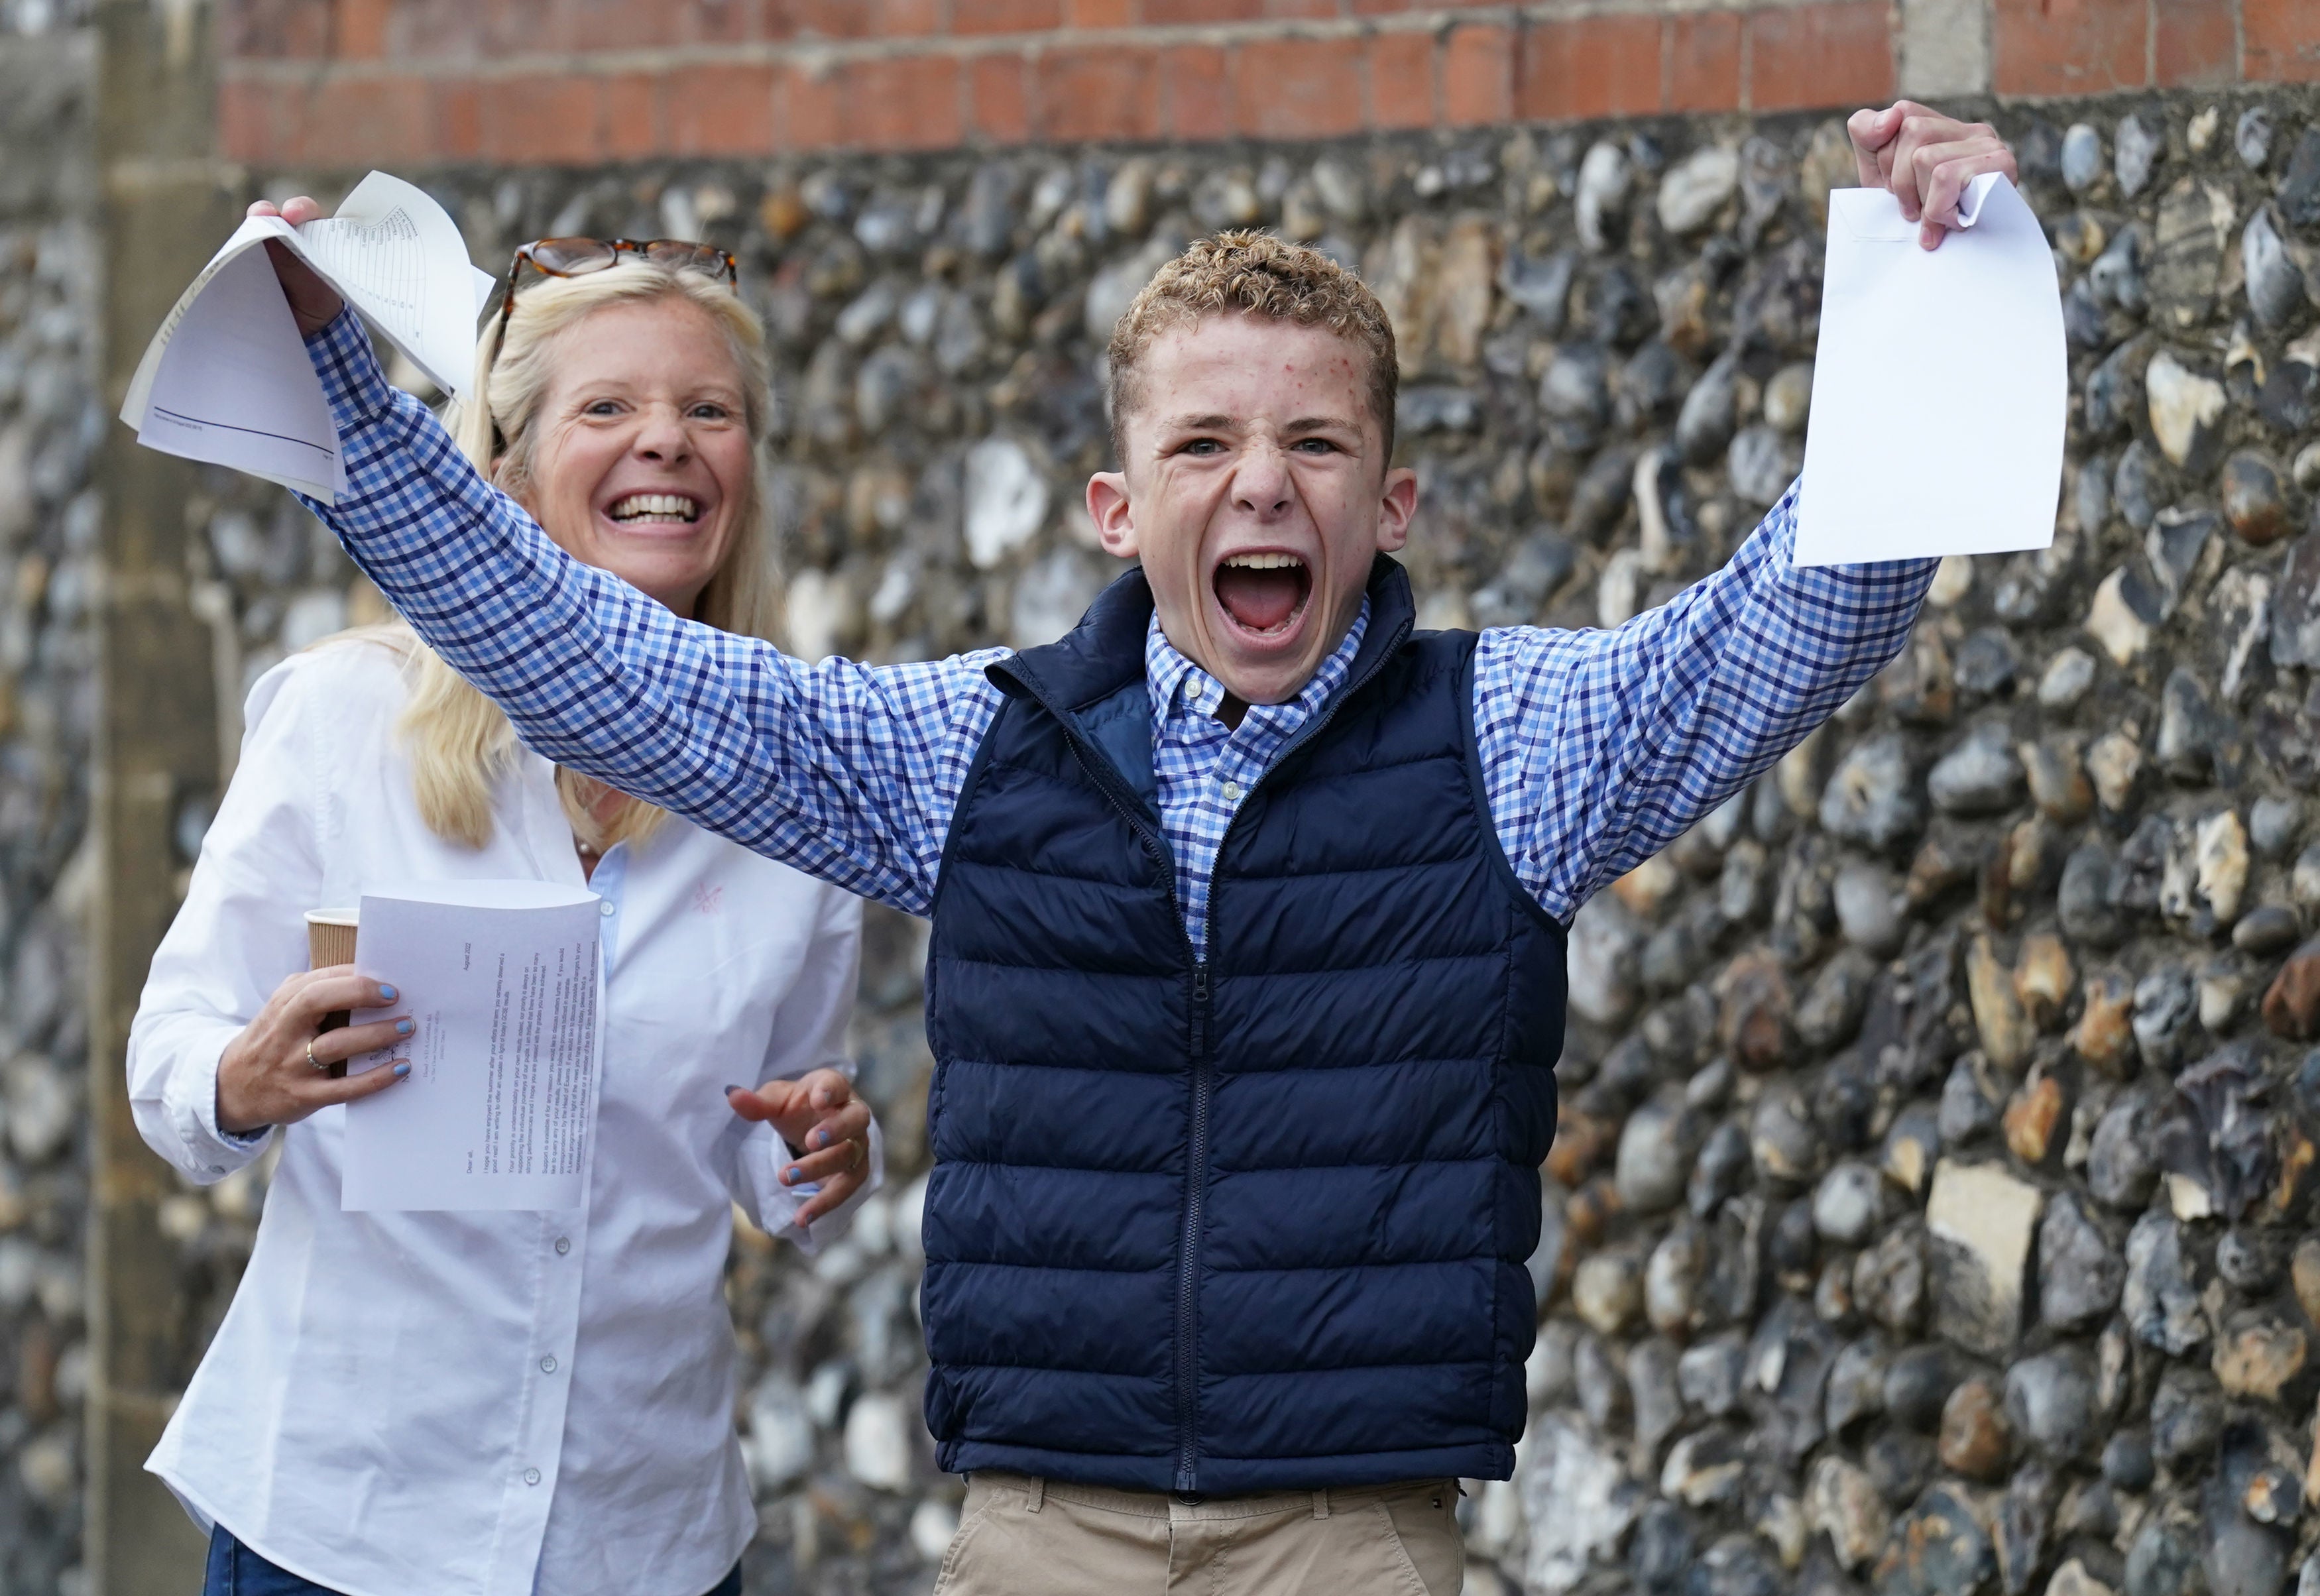 Finney Harrod in Norwich was one of the many pupils to find out GCSE results